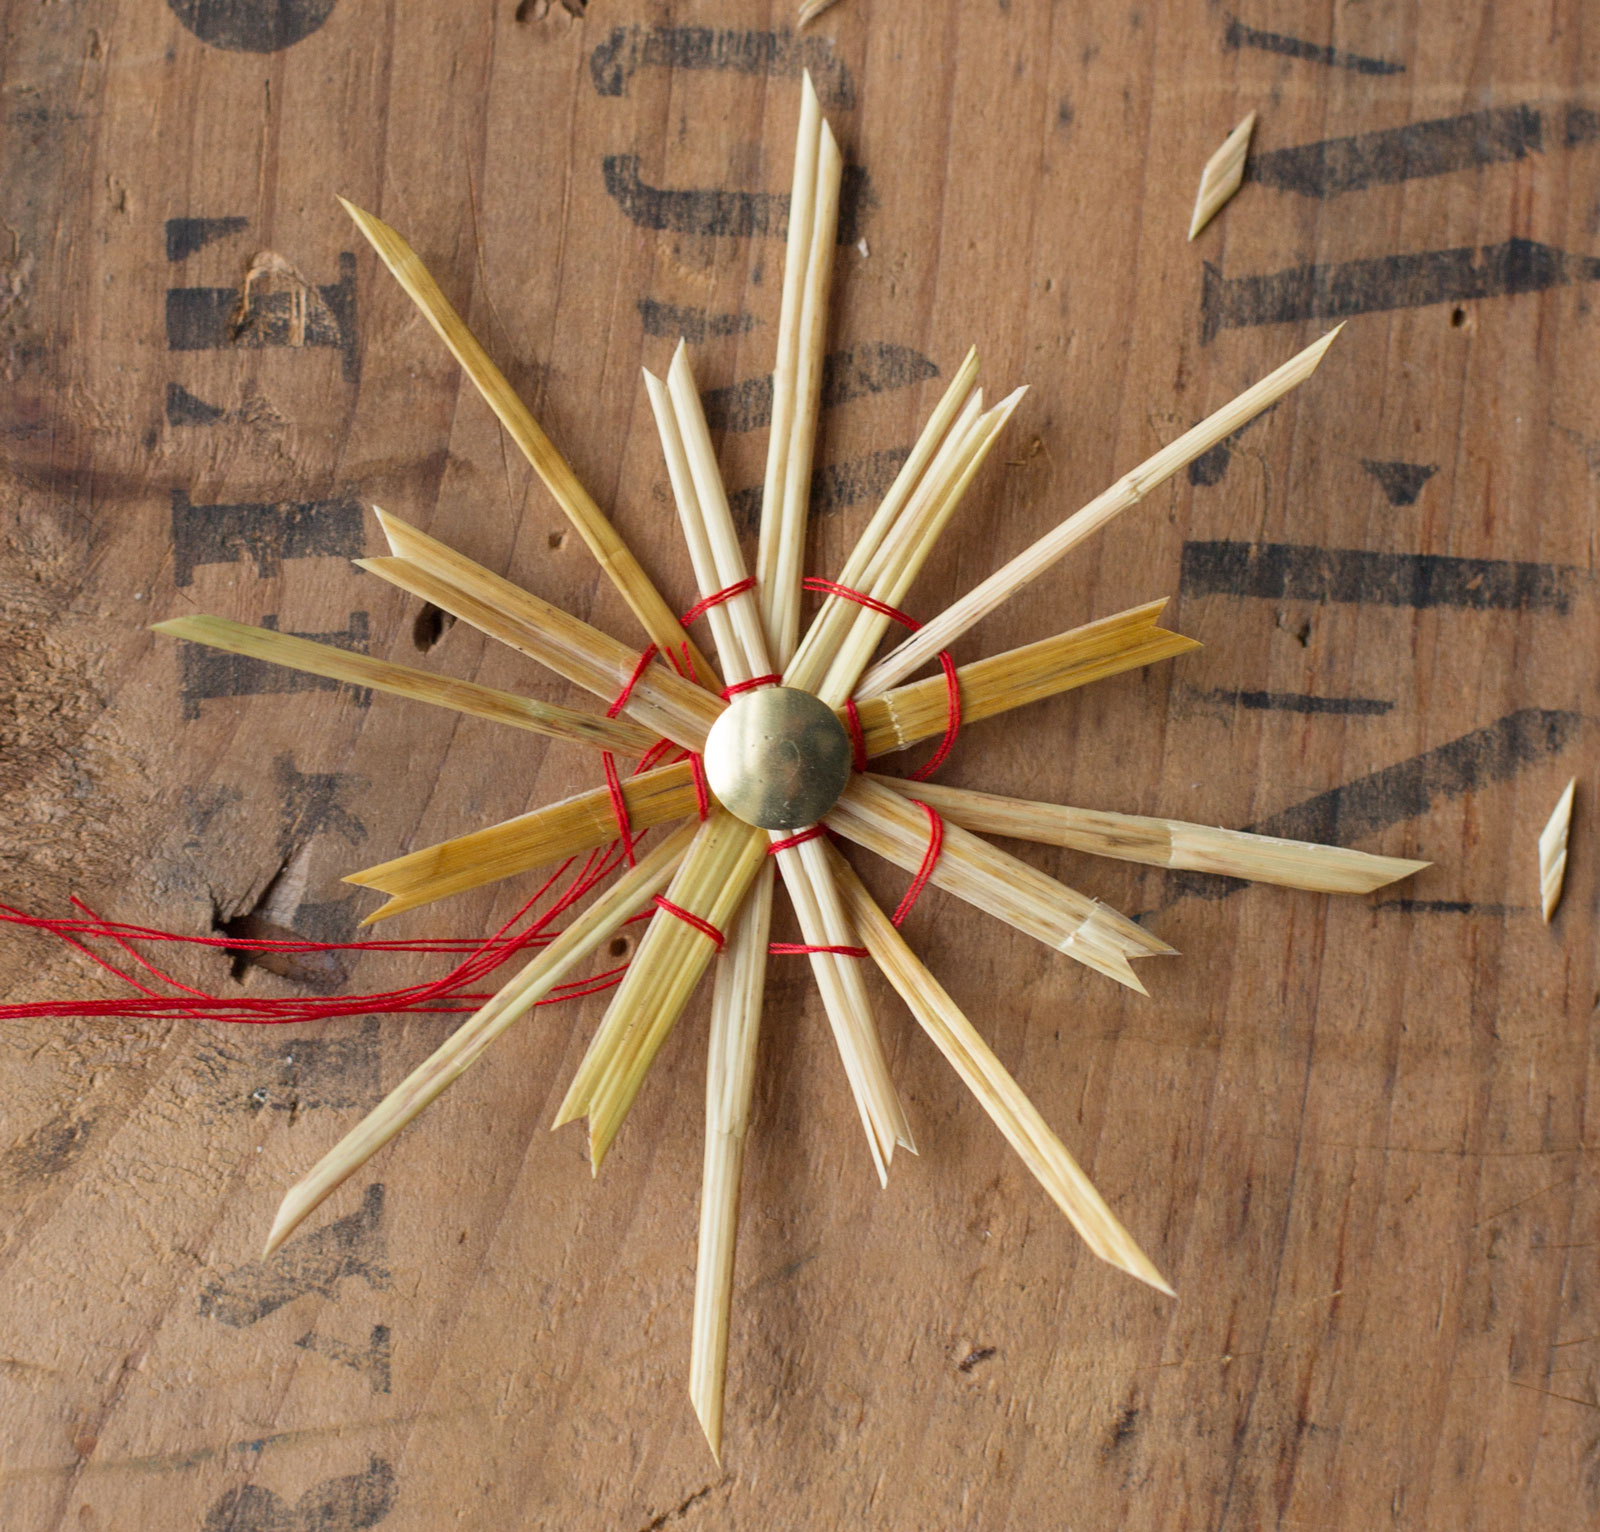 How To Make Natural Straw Star Ornaments - Sew Historically